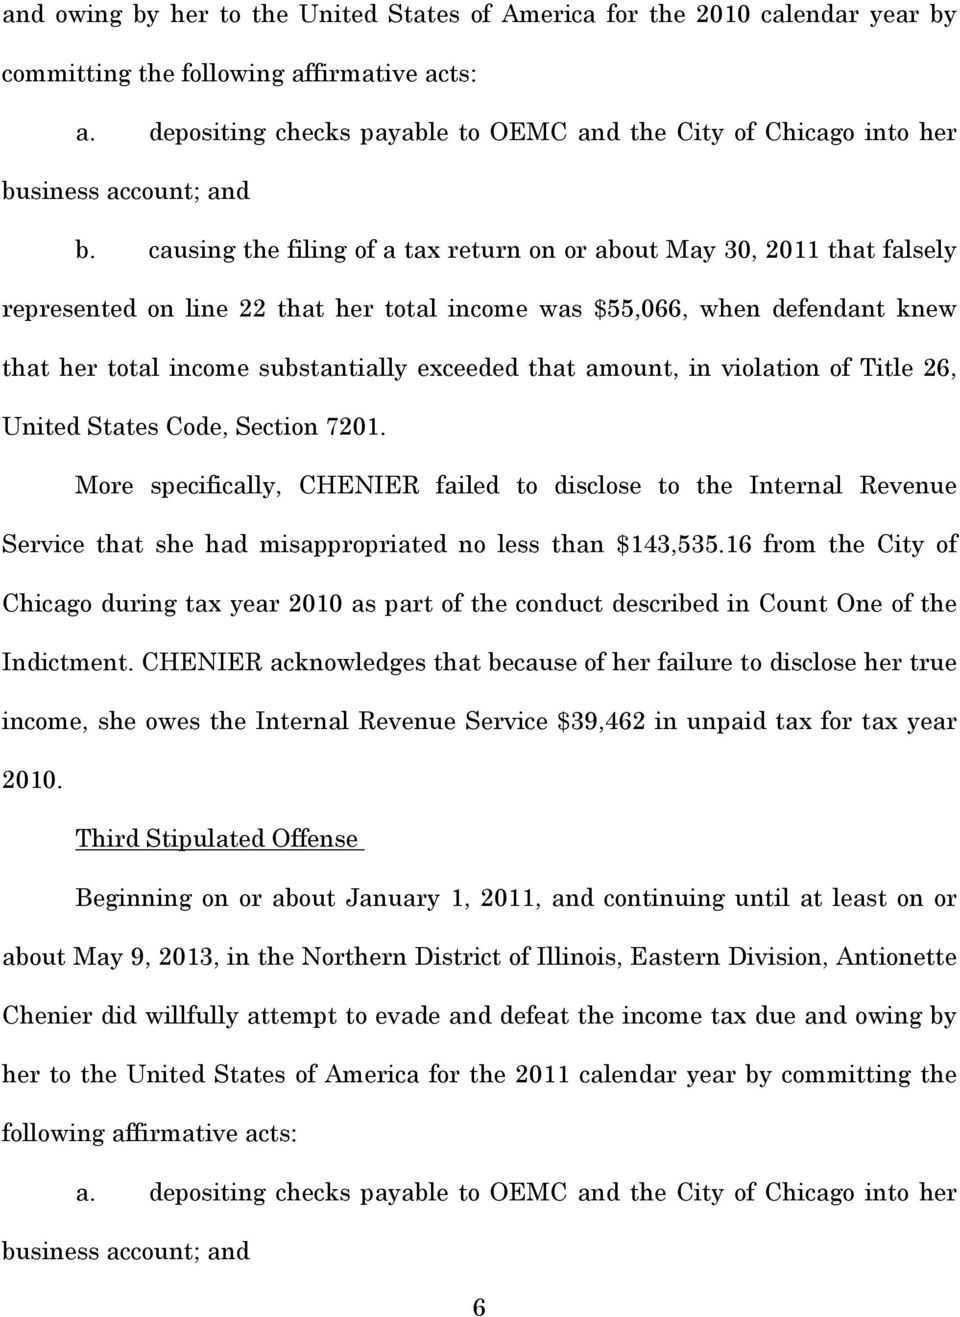 causing the filing of a tax return on or about May 30, 2011 that falsely represented on line 22 that her total income was $55,066, when defendant knew that her total income substantially exceeded